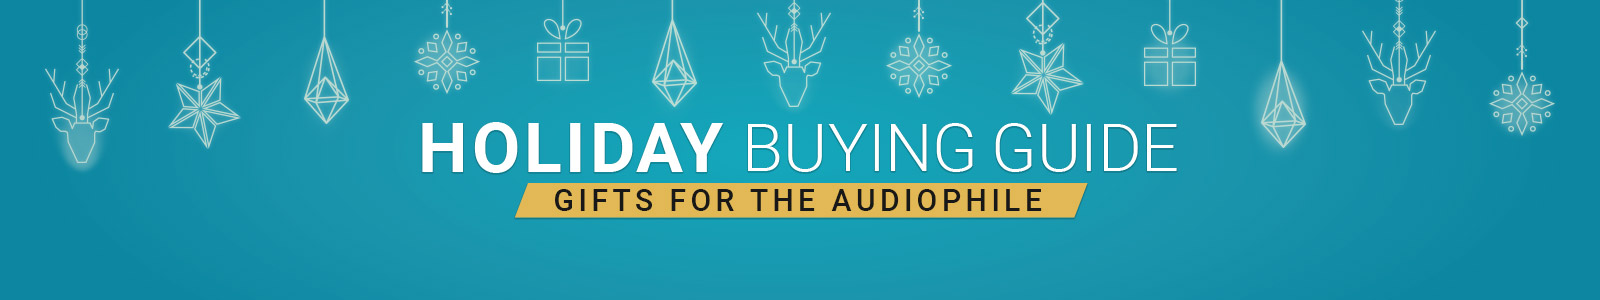 Holiday Buying Guide
Gifts for the Audiophile
Shop Now